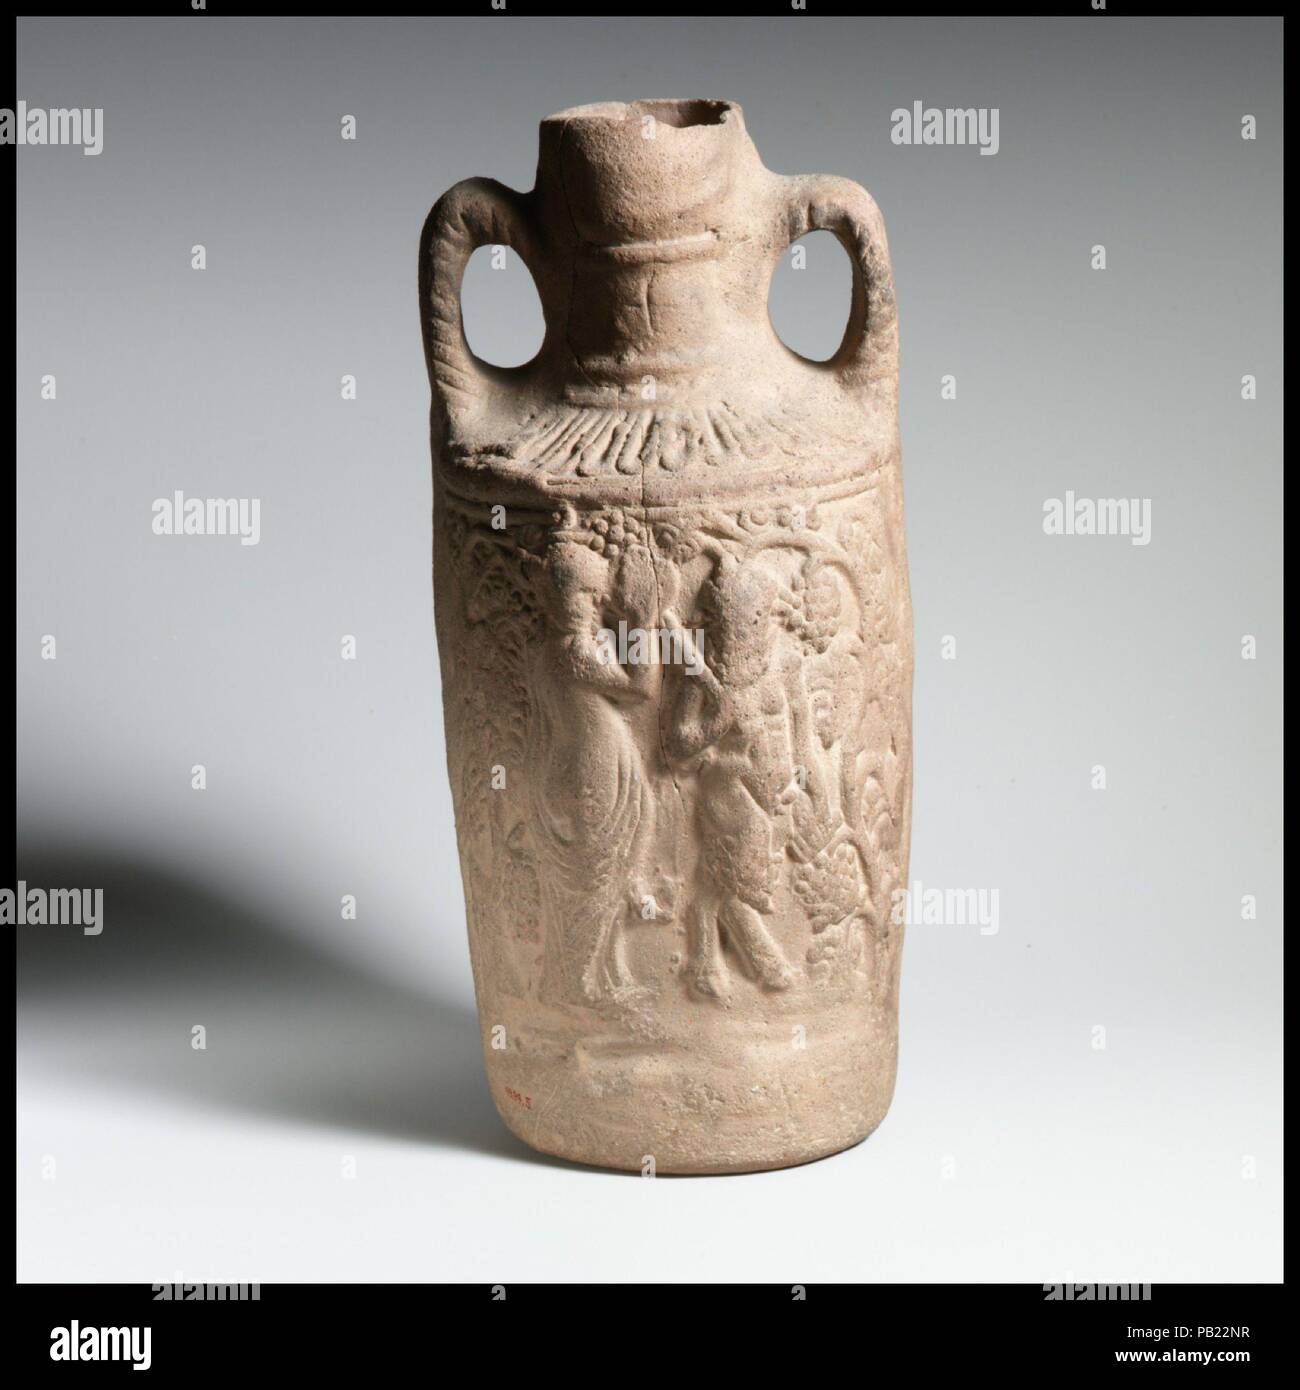 Terracotta amphora (jug). Culture: Roman. Dimensions: H. 10 3/8 in. (26.4 cm). Date: 2nd-3rd century A.D..  This vessel was made at Cnidus, a trading and manufacturing port in Caria (southwestern Turkey), famed for its statue of Aphrodite by the Greek sculptor Praxiteles. The relief decoration shows the god Dionysus on one side and Pan with a dancing nymph on the other. Similar scenes can also be found on much grander examples of Roman art, such as mosaics and marble sarcophagi. Museum: Metropolitan Museum of Art, New York, USA. Stock Photo